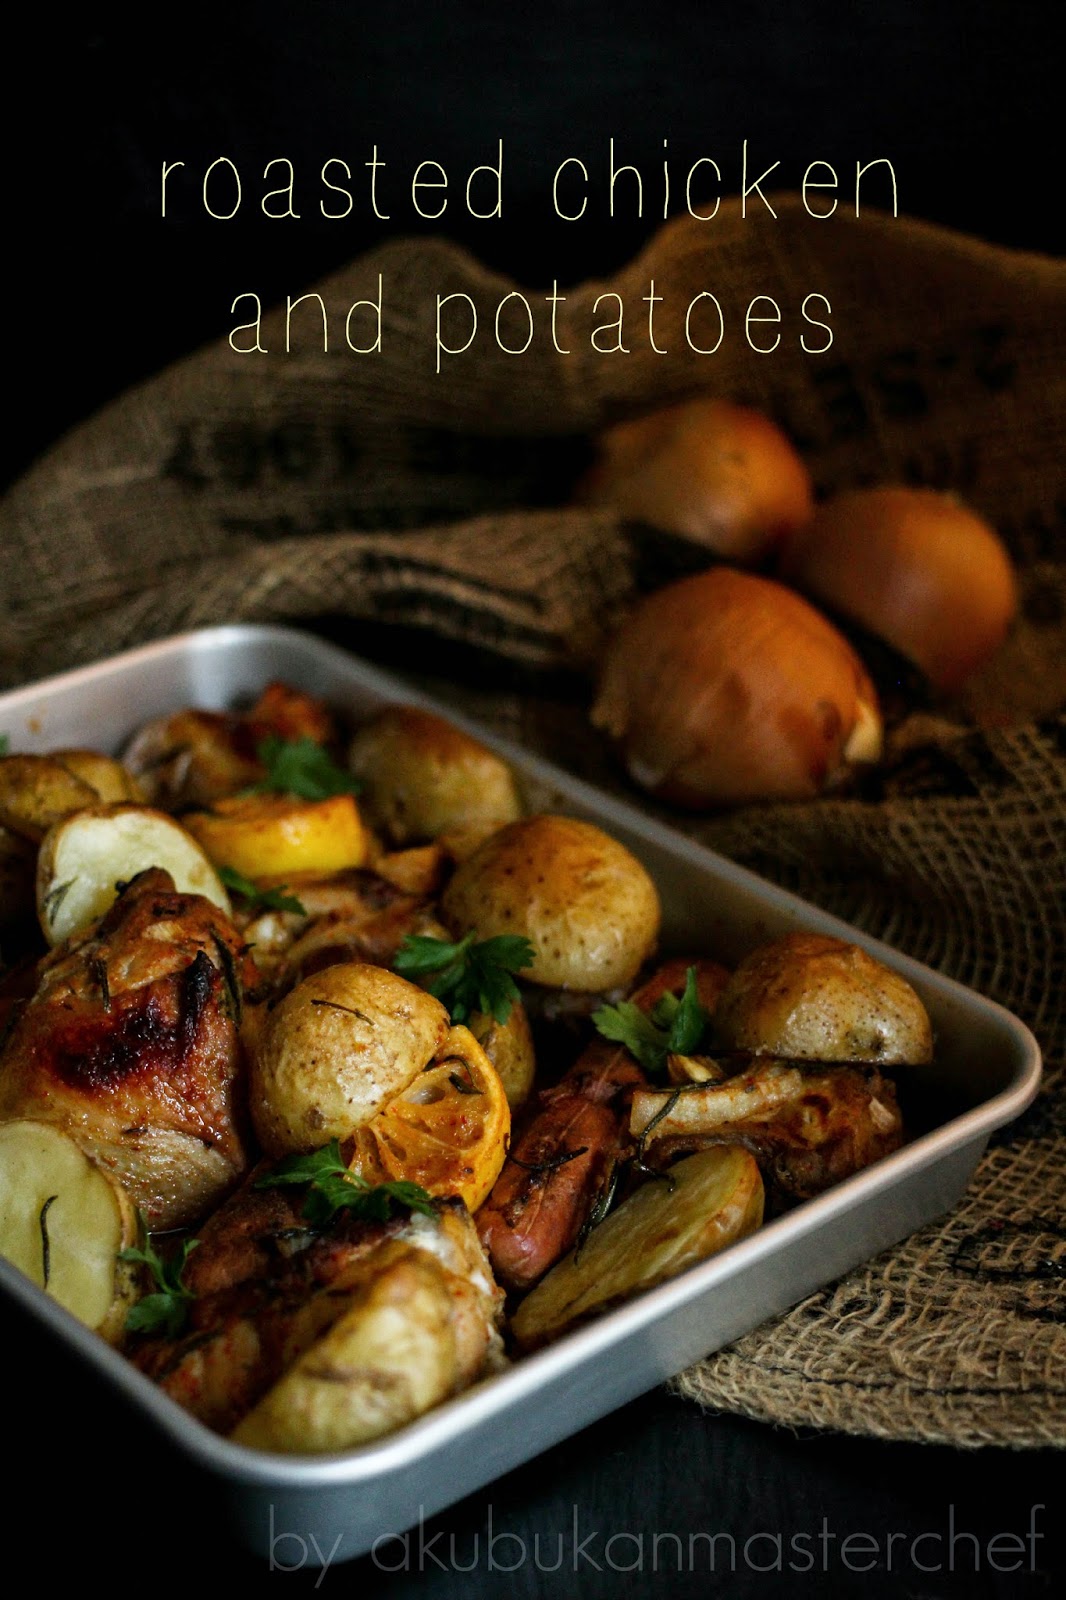 Resepi 318 Roasted Chicken And Potatoes